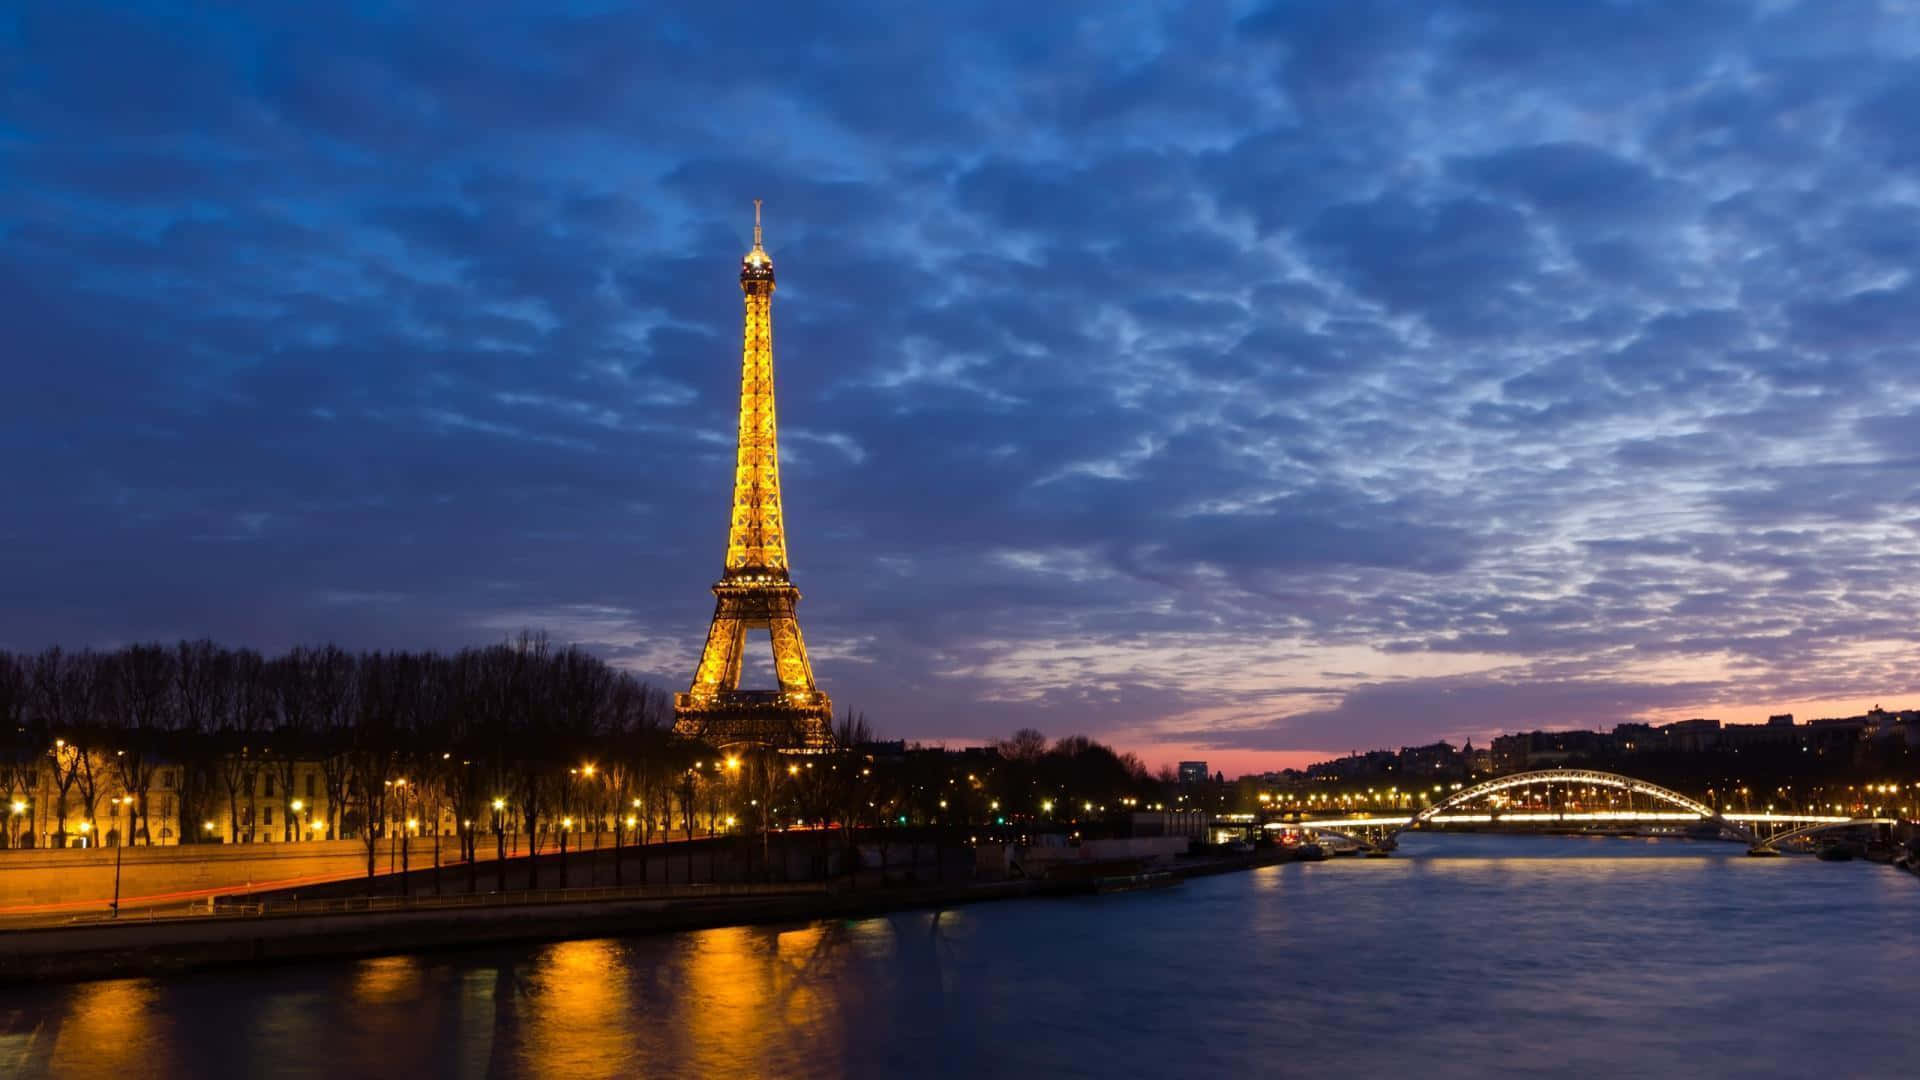 Feel the romance at the Eiffel Tower in Paris, France